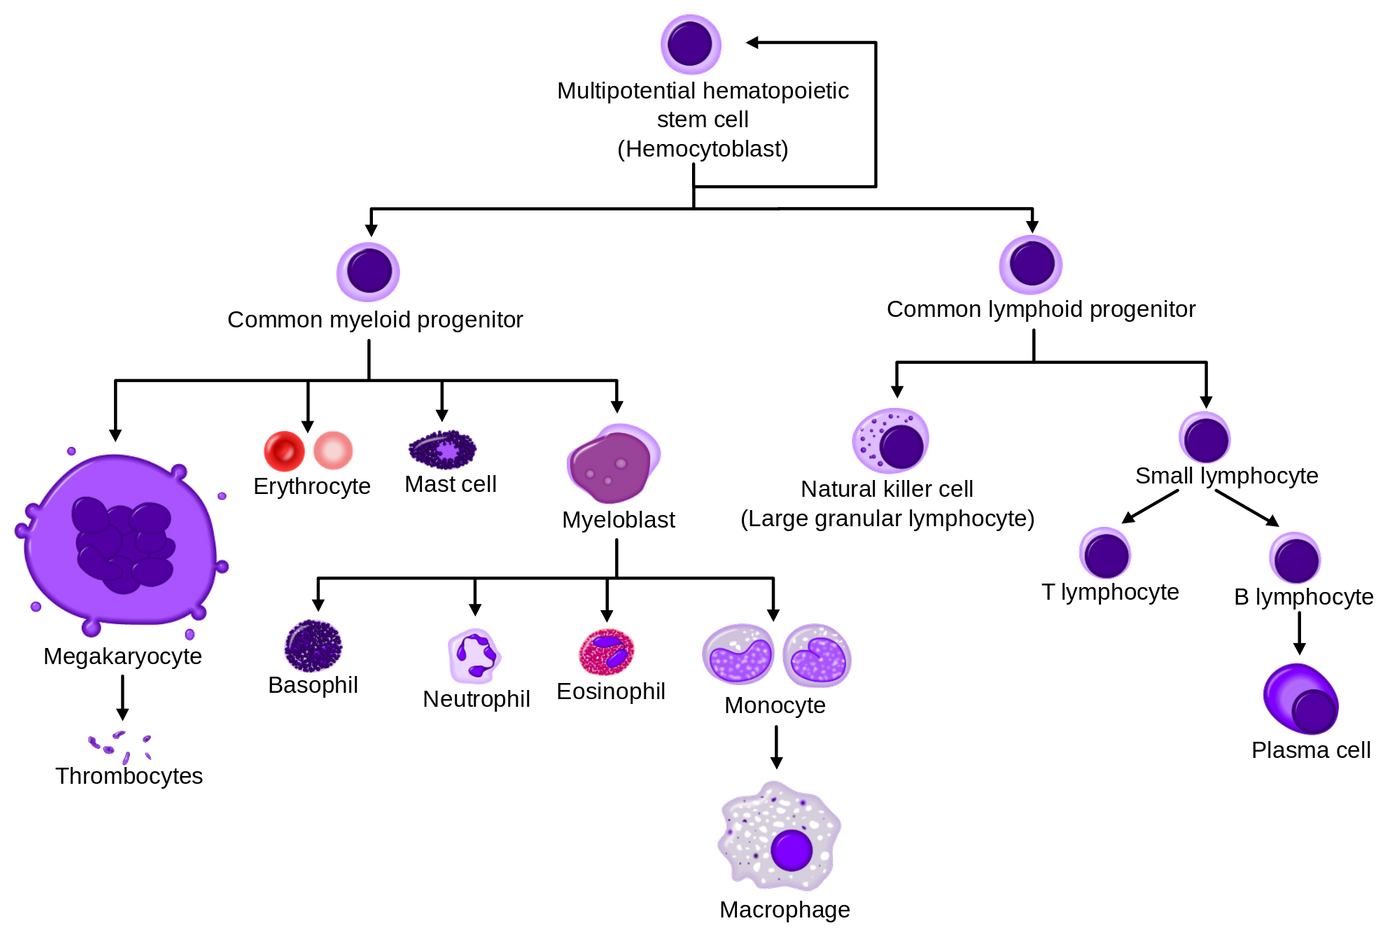 A simplified overview of normal human hematopoiesis from Wikipedia